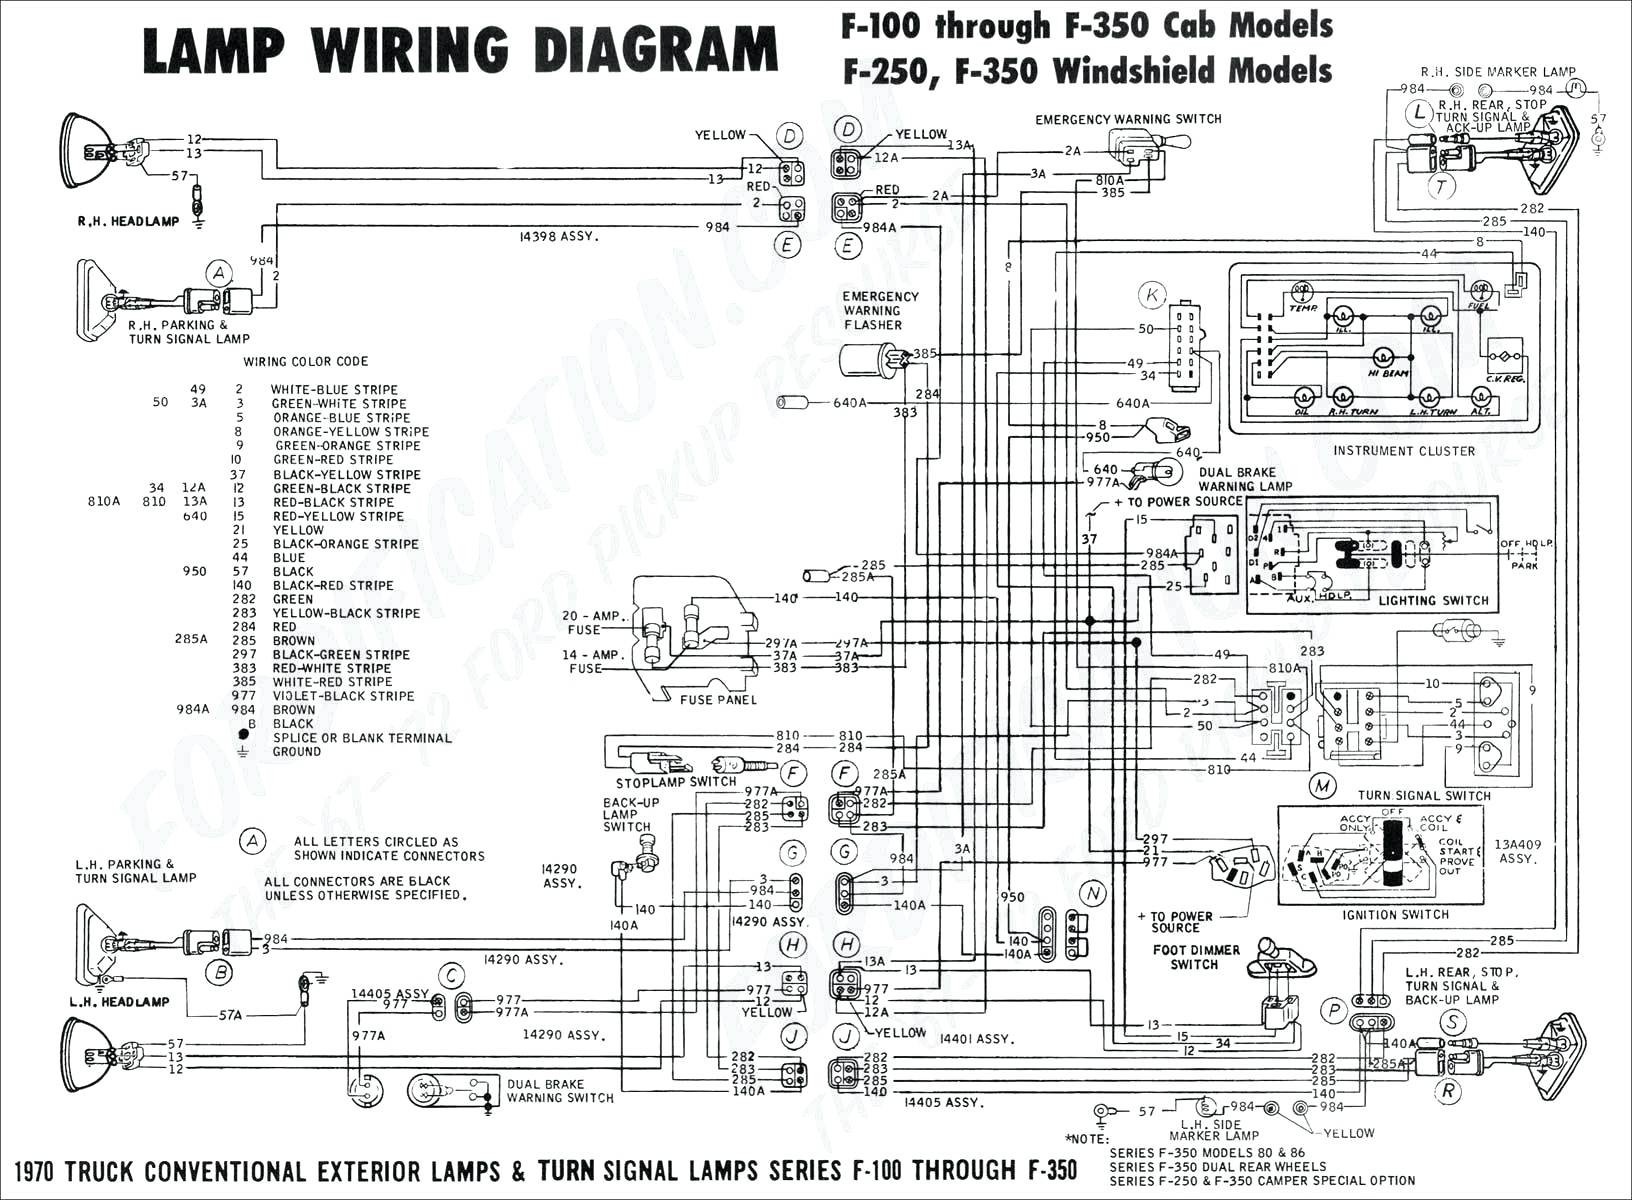 2003 ford Focus Wiring Diagram 2001 ford Focus Stereo Wiring Diagram Fresh 2012 ford Focus Stereo